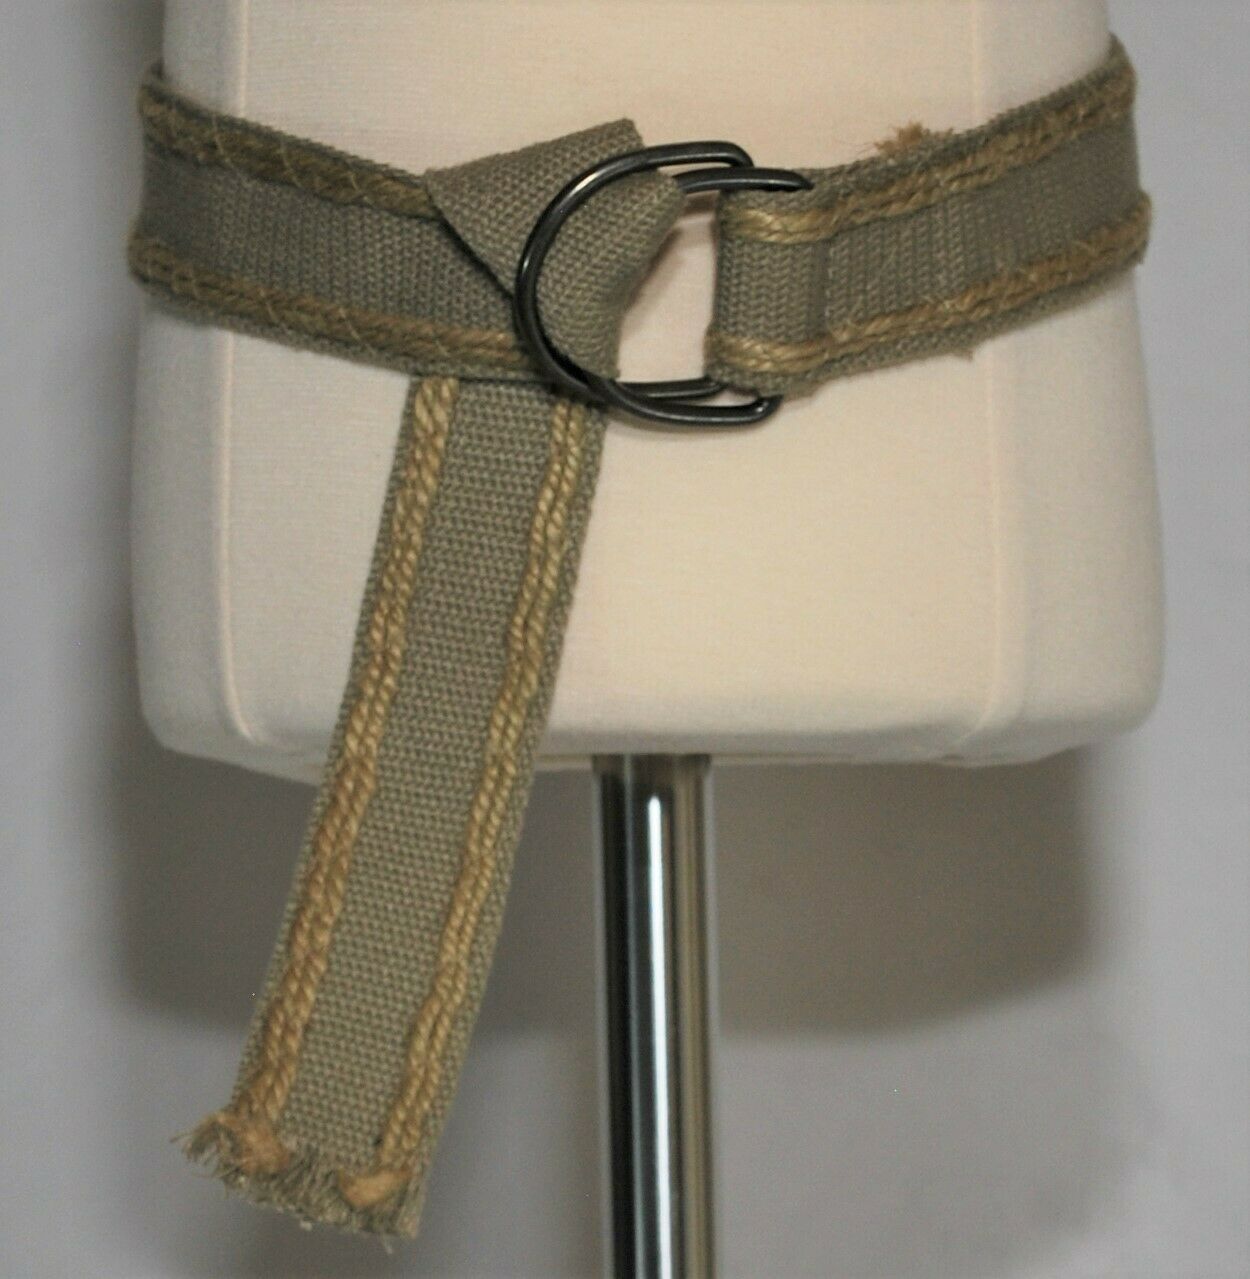 Tan Polyester/canvas Belt - 32 1/2 Inches ** Very Good Condition